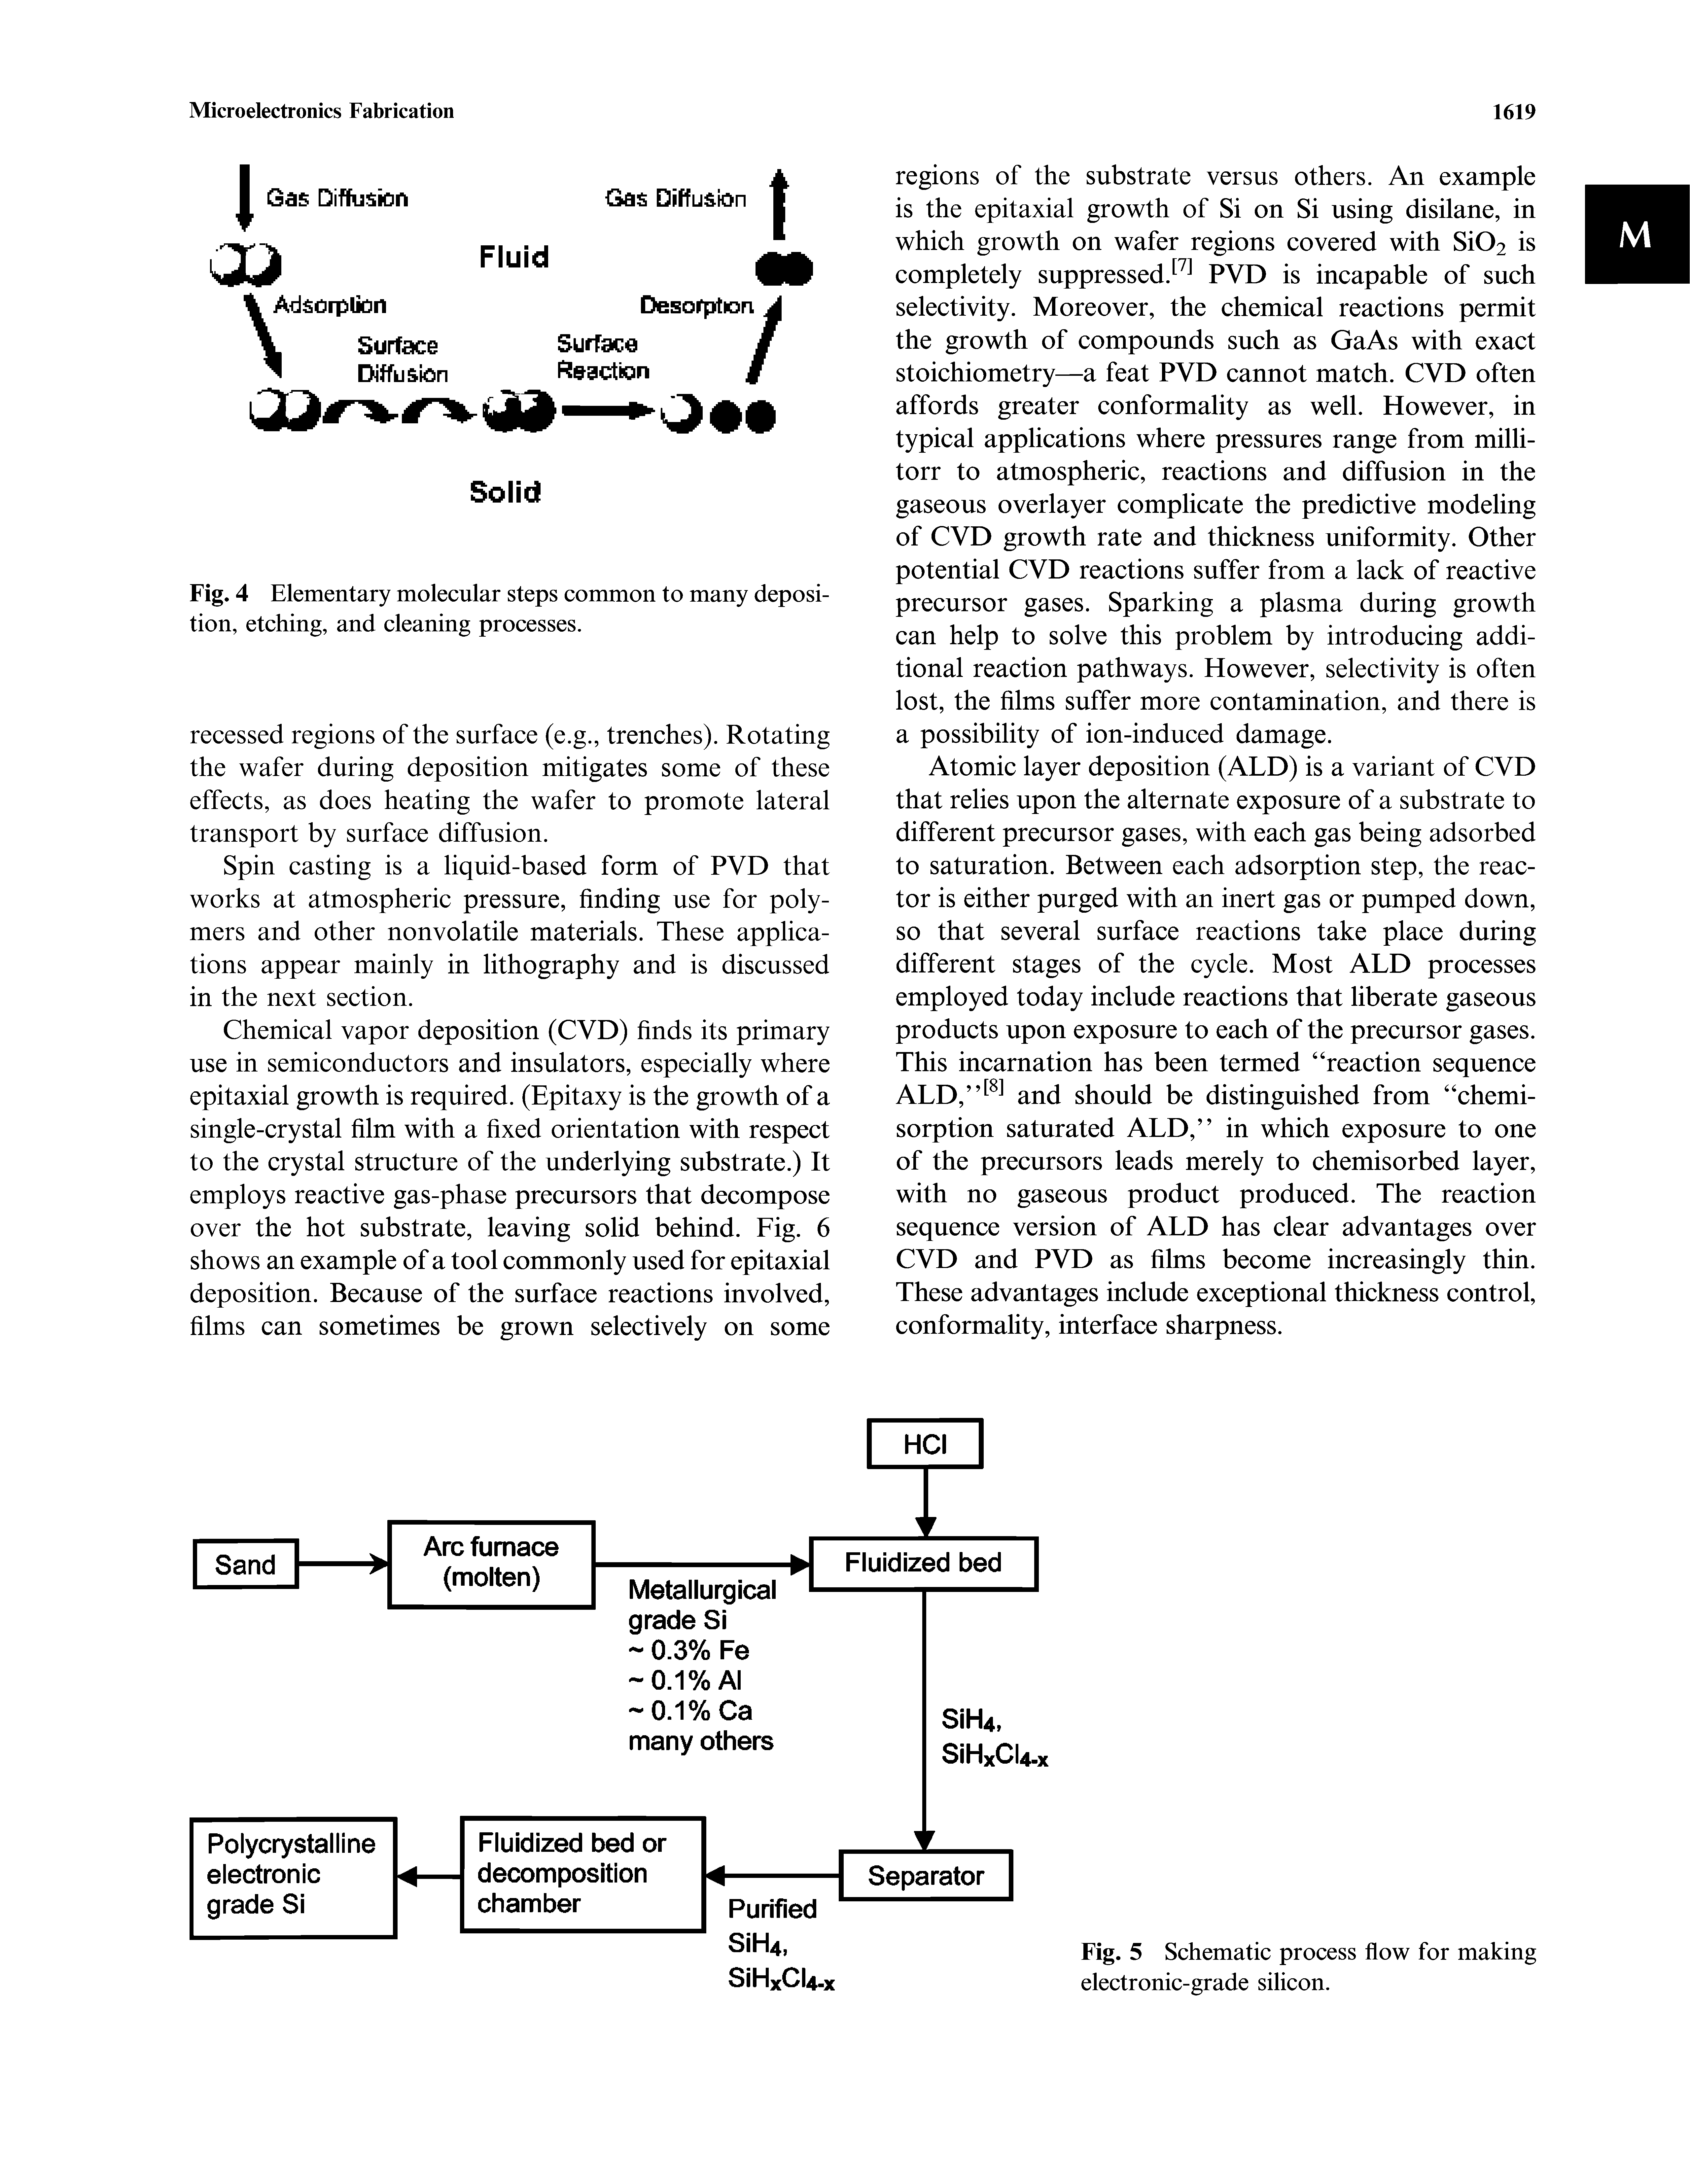 Fig. 5 Schematic process flow for making electronic-grade silicon.